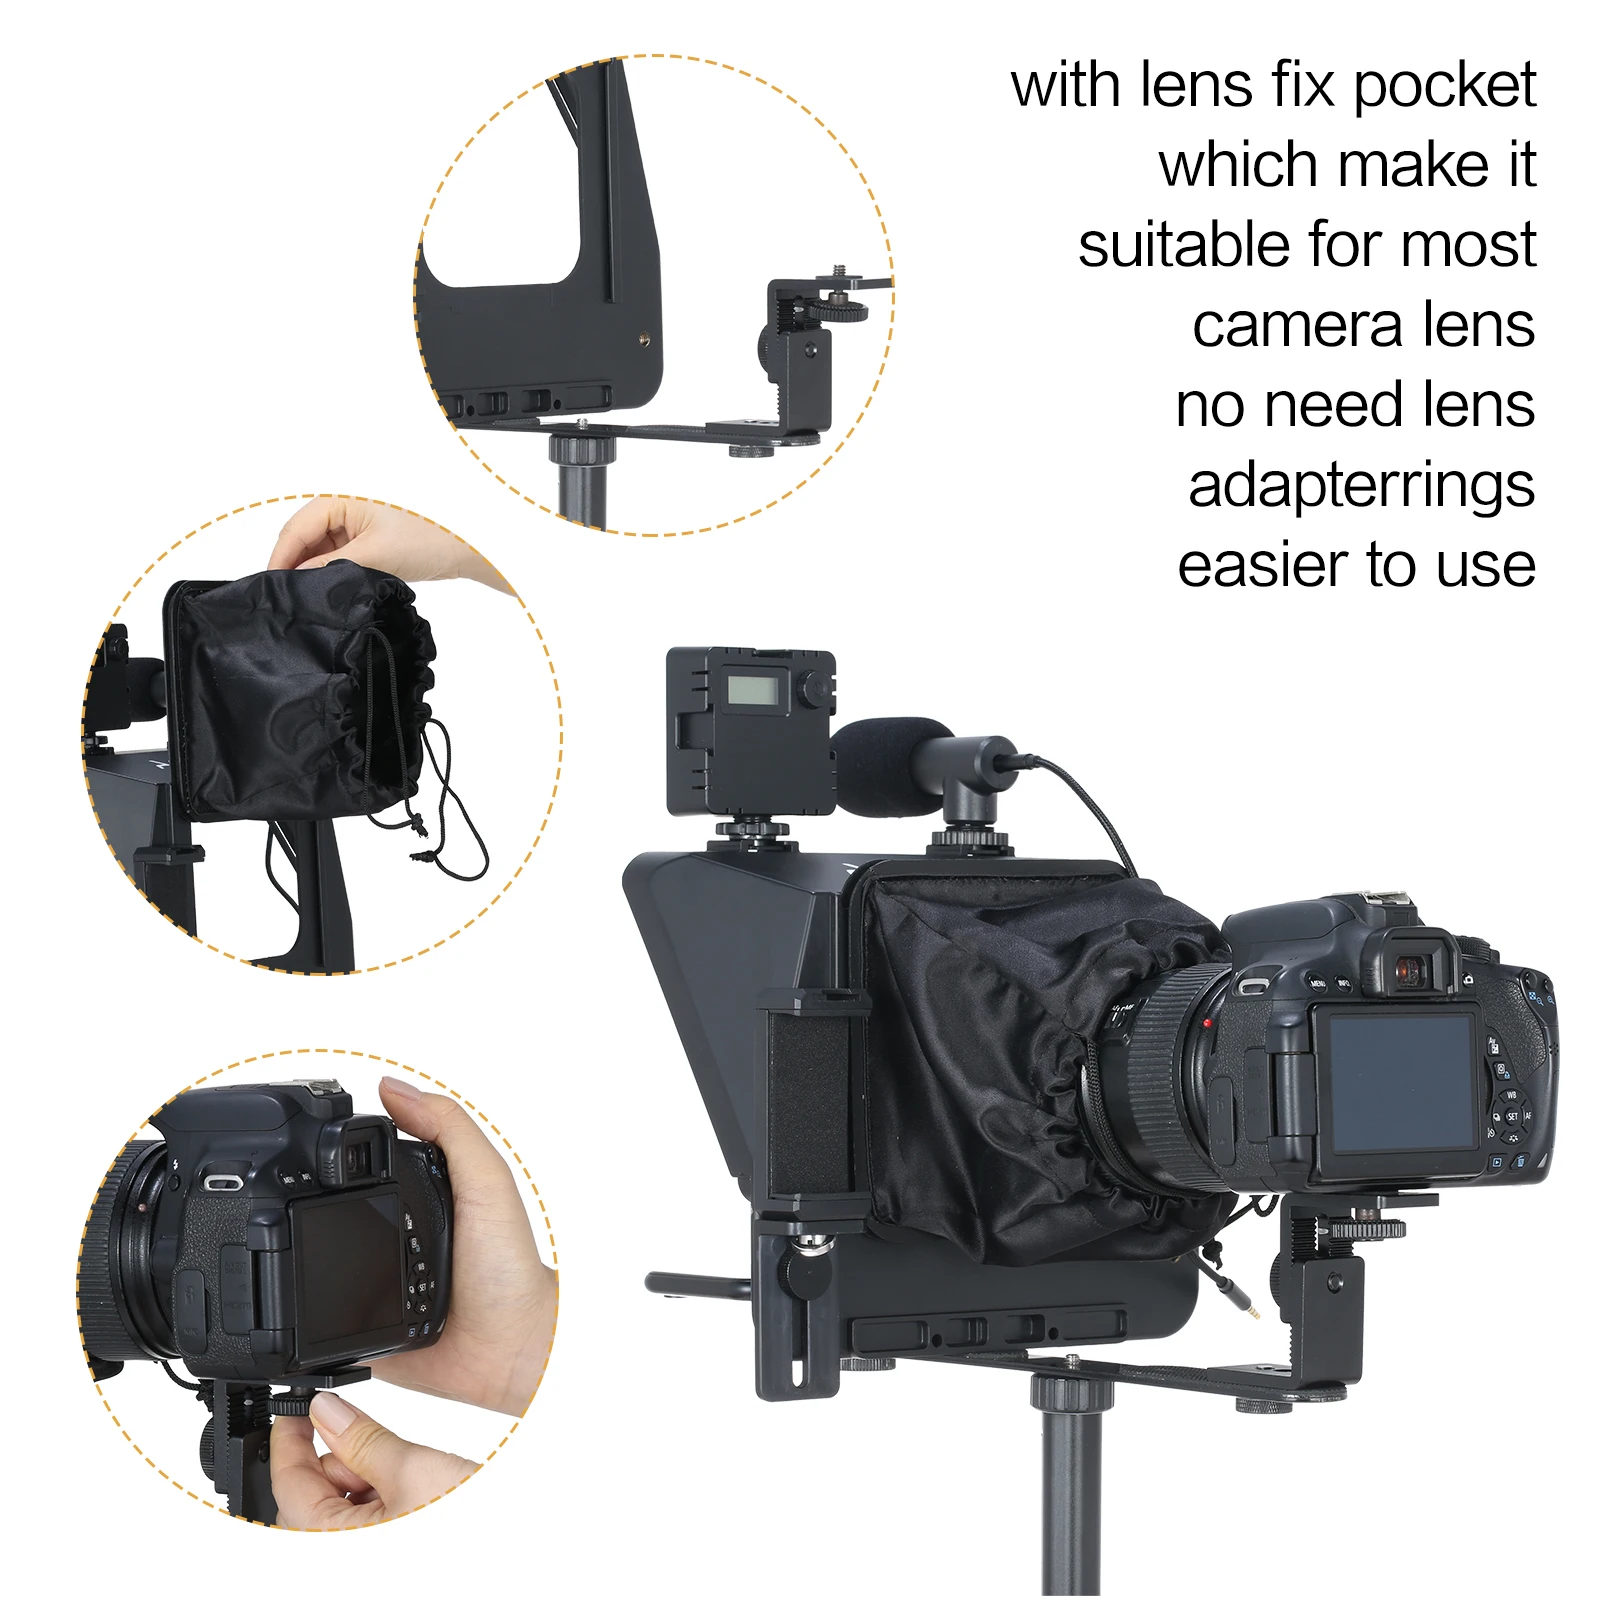 Andoer A10 Portable Teleprompter Prompter with Phone Holder Remote Control for Smartphone DSLR Camera